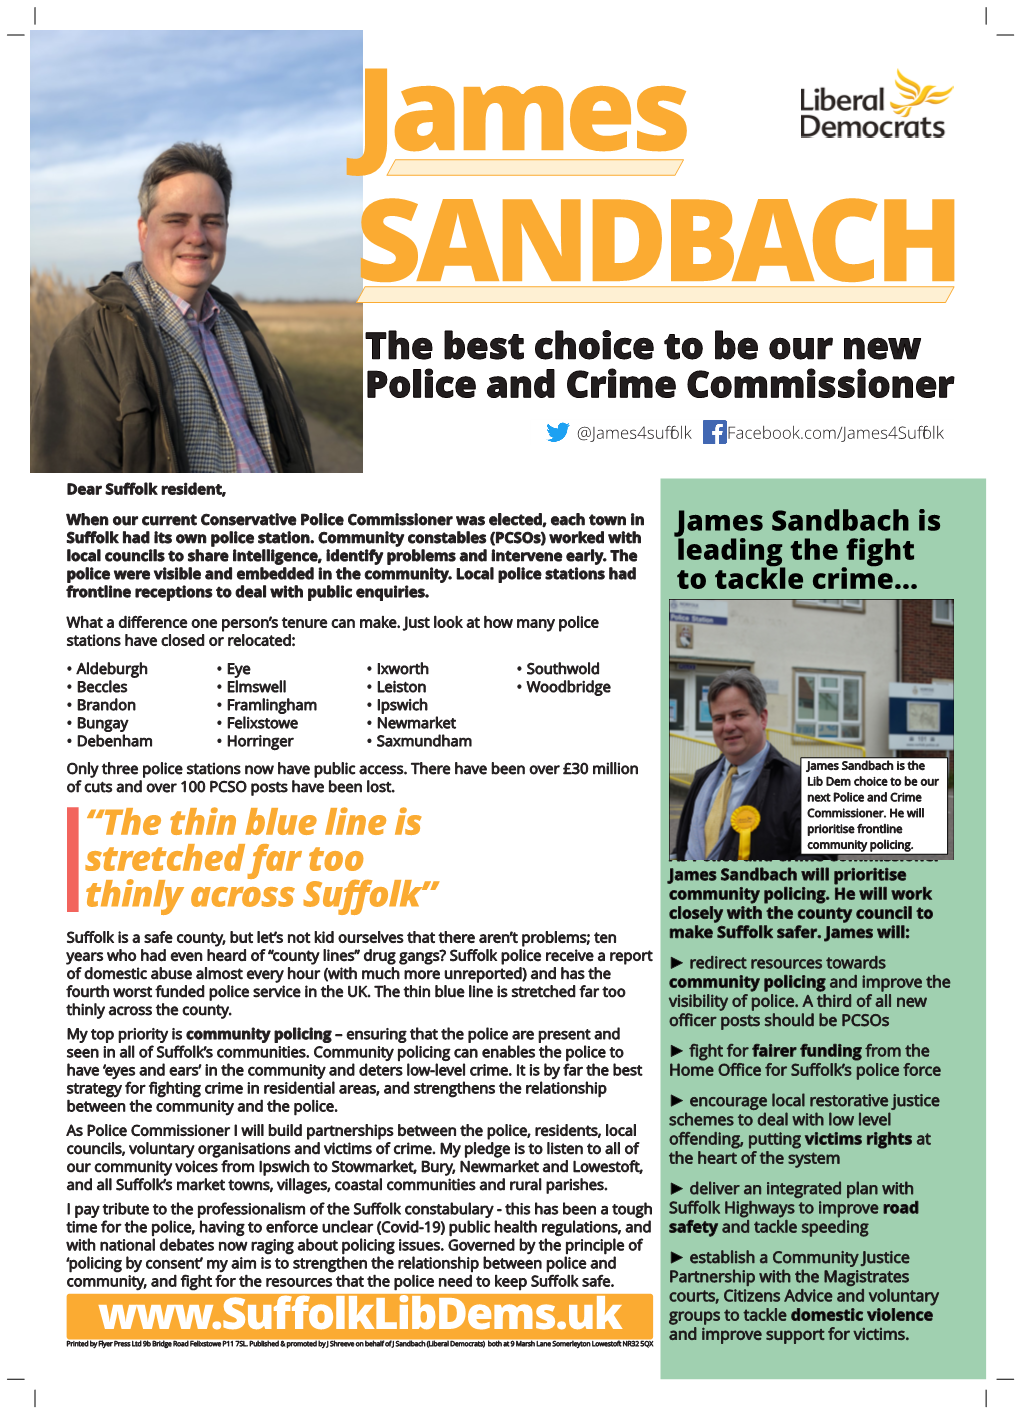 James SANDBACH the Best Choice to Be Our New Police and Crime Commissioner